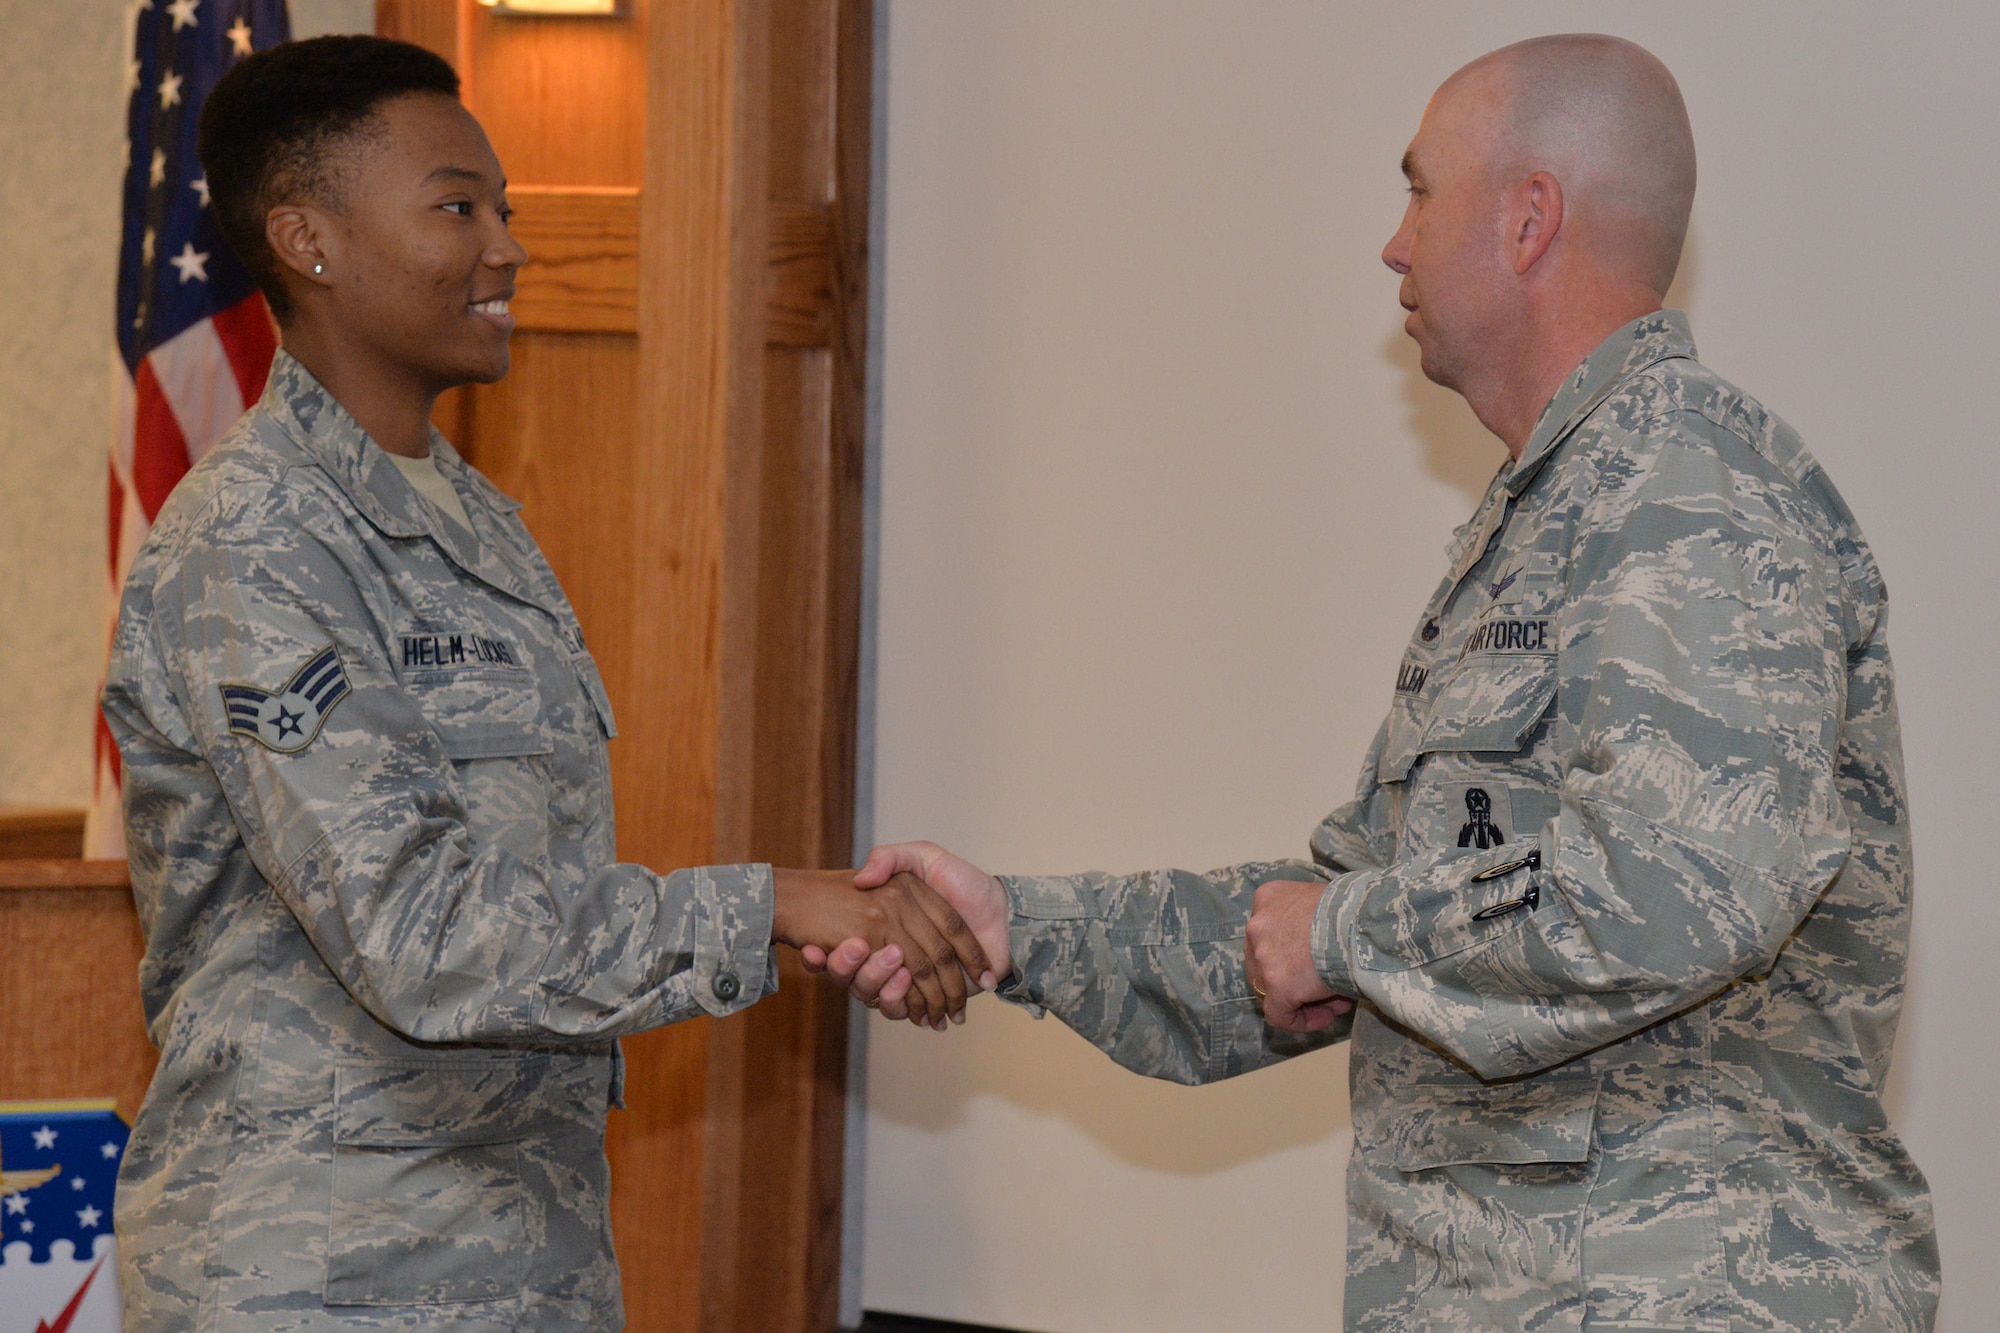 Senior Airman Jasmine Helm-Lucas, 341st Munitions Squadron munitions controller, is recognized by Col. Ron Allen, 341st Missile Wing commander, June 7, 2017, at Malmstrom Air Force Base, Mont. Helm-Lucas was recognized for sharing her personal story with members of the base. (U.S. Air Force photo/Airman 1st Class Daniel Brosam)